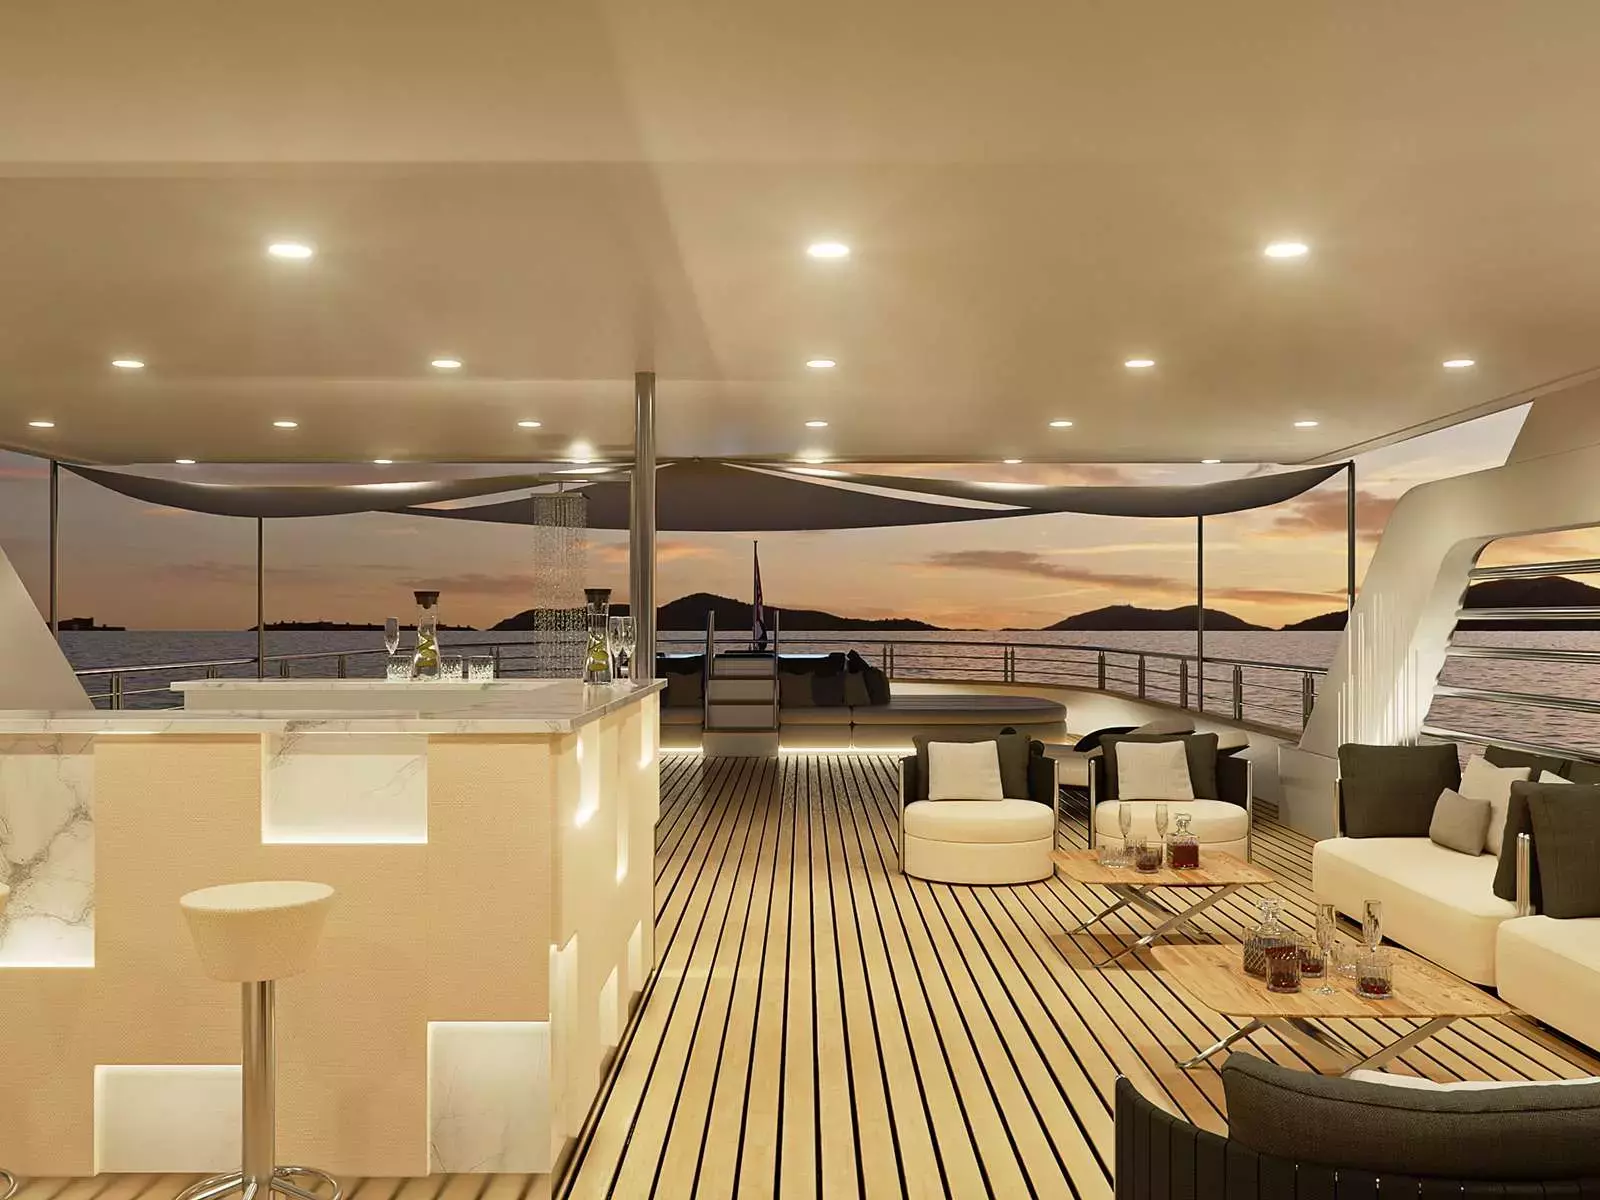 Cristal by Custom Made - Special Offer for a private Motor Yacht Charter in Trogir with a crew